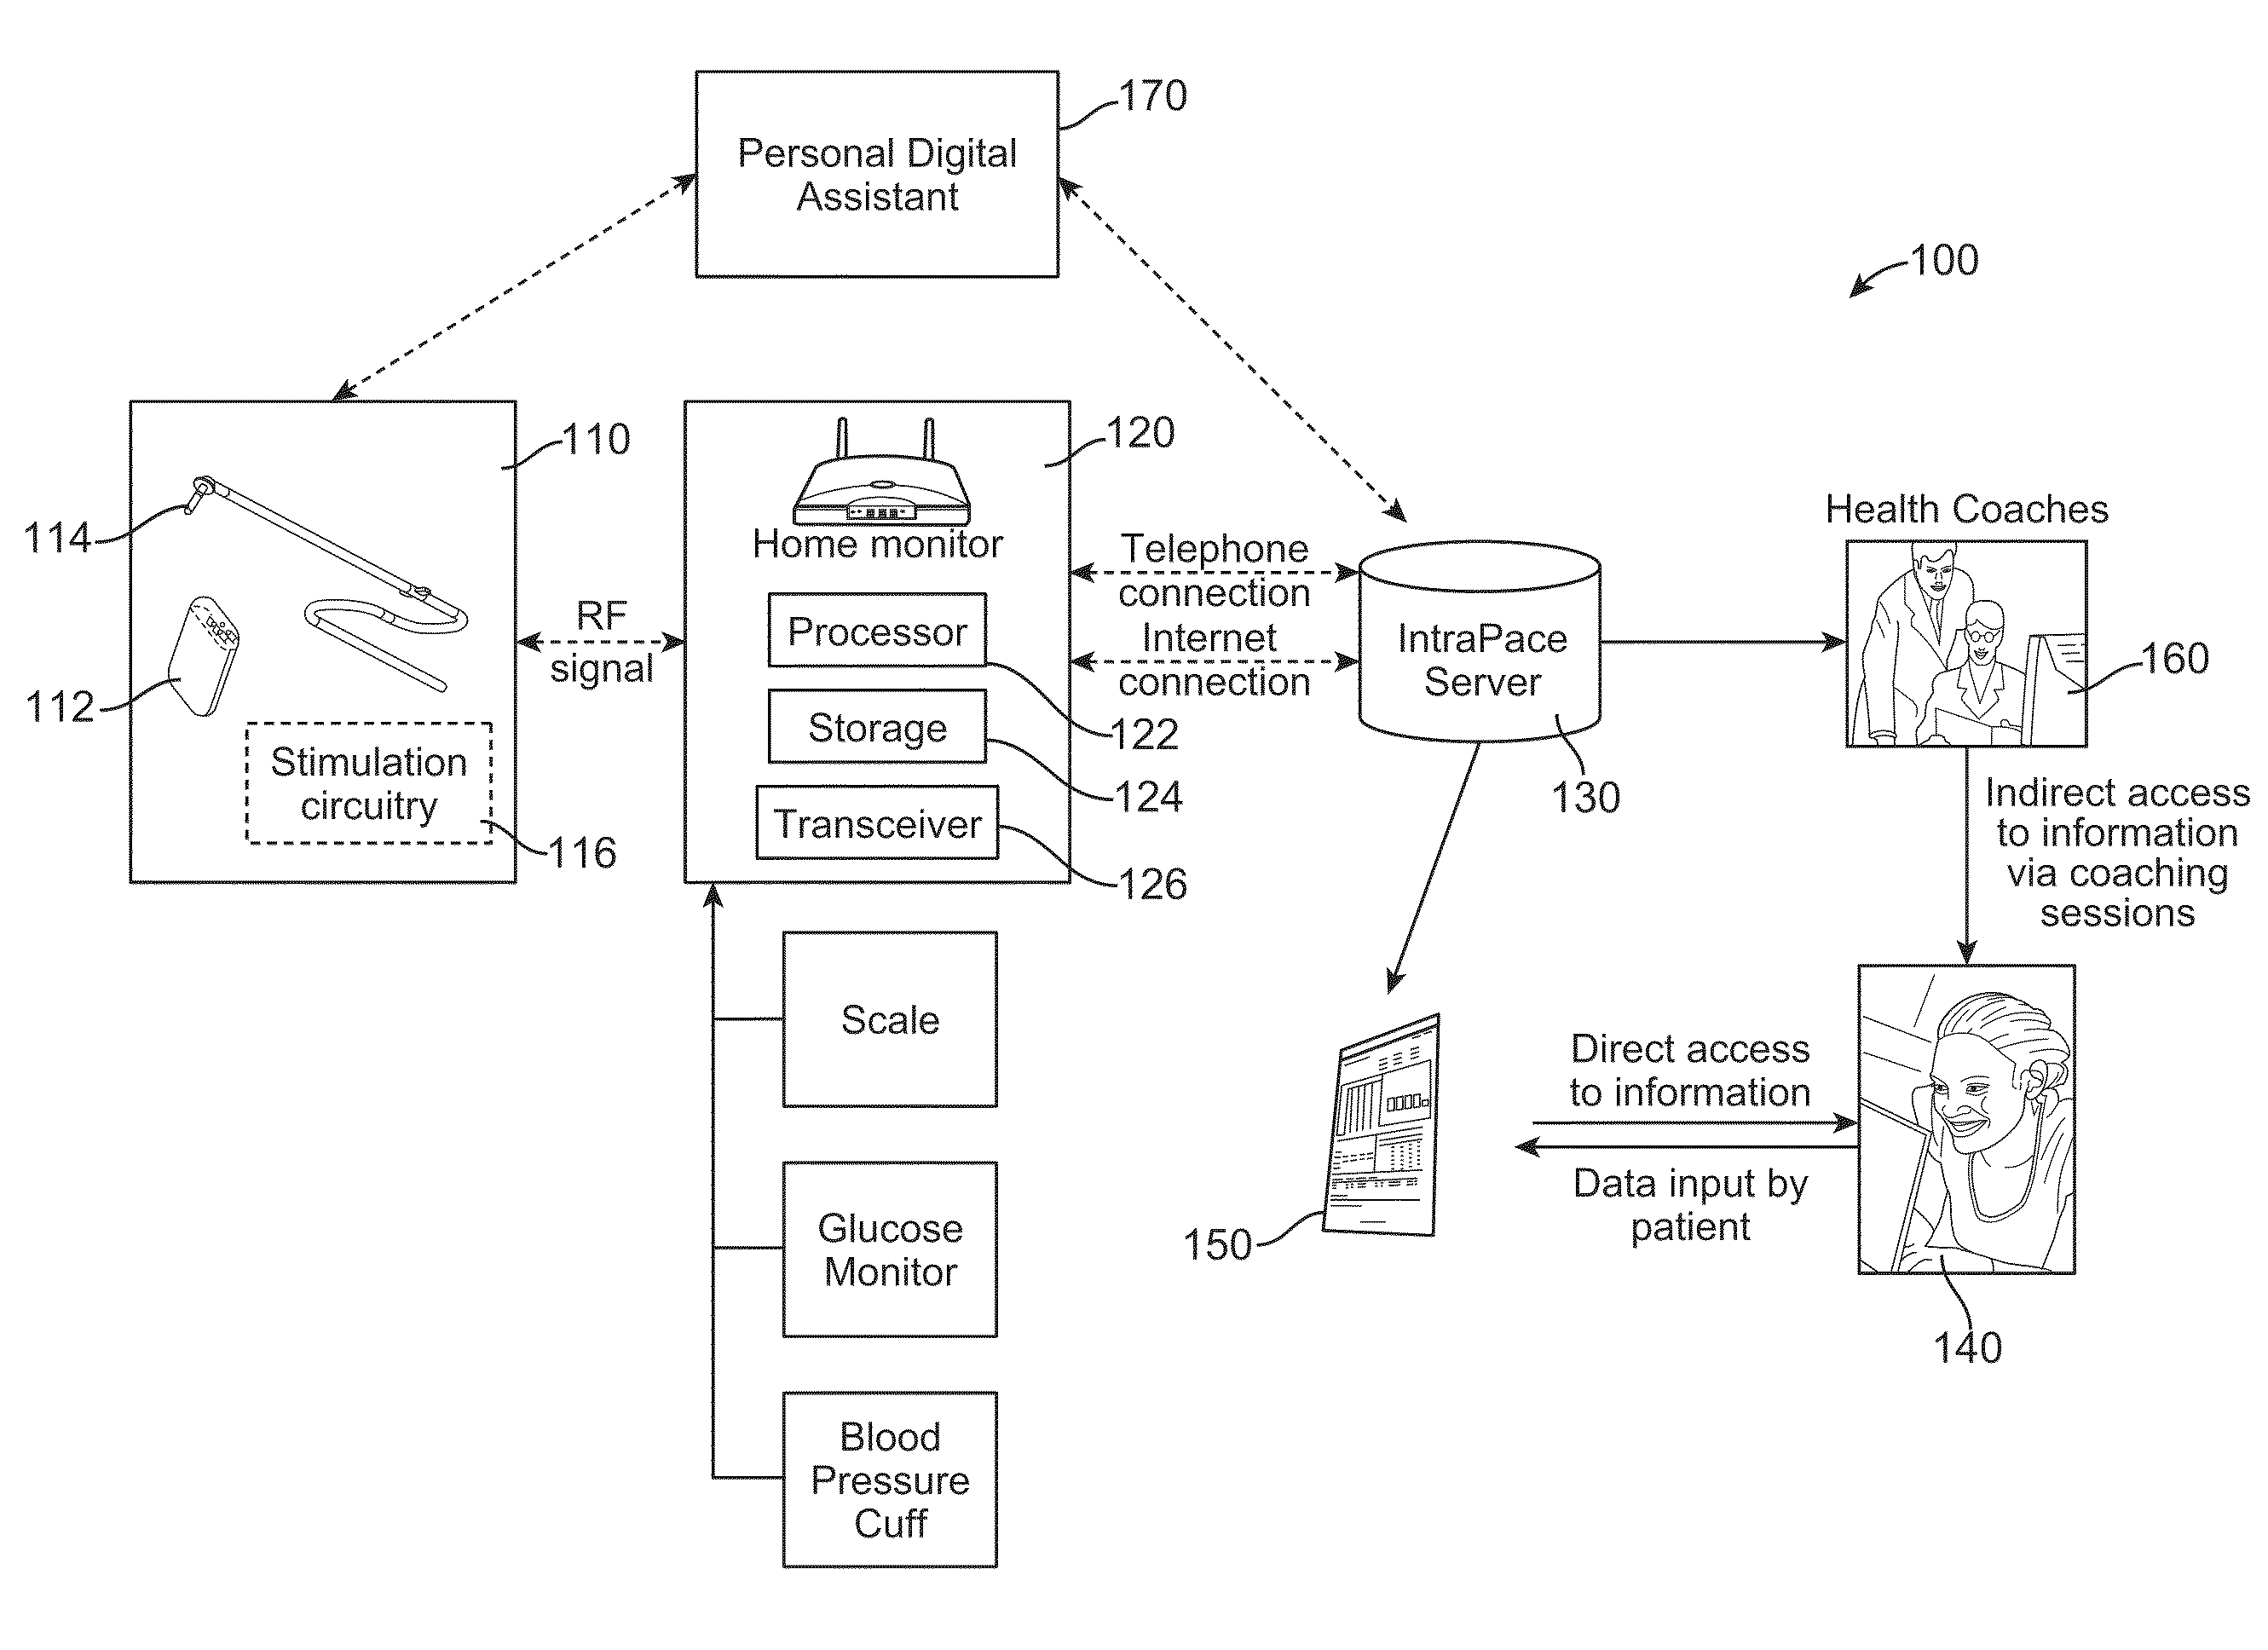 Feedback systems and methods for communicating diagnostic and/or treatment signals to enhance obesity treatments